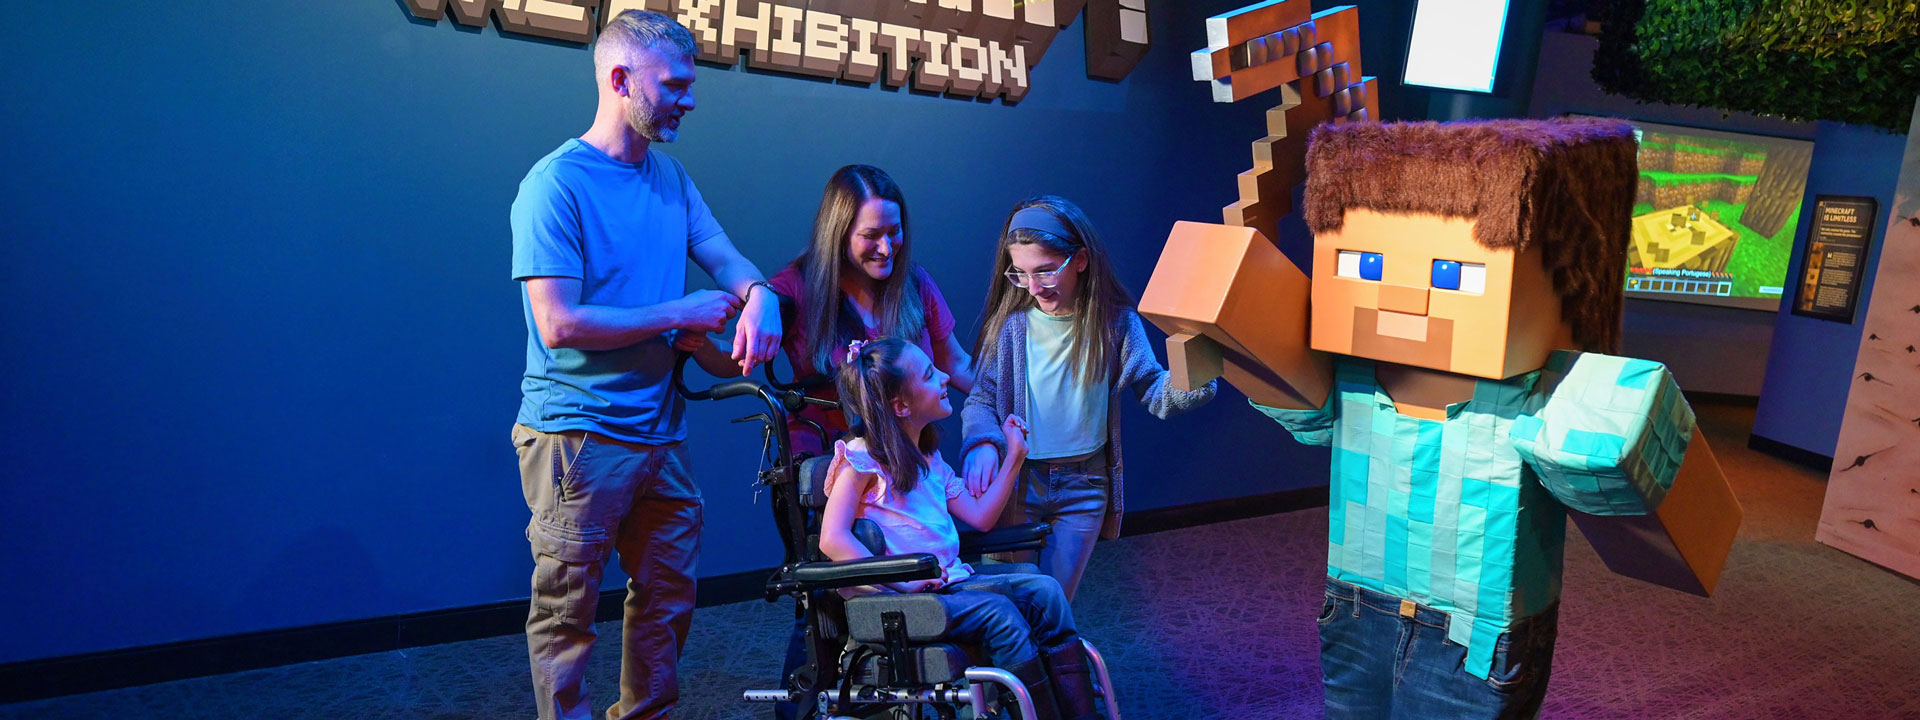 A family is gathered around the entrance to the Minecraft exhibit admiring the Steve statue. 